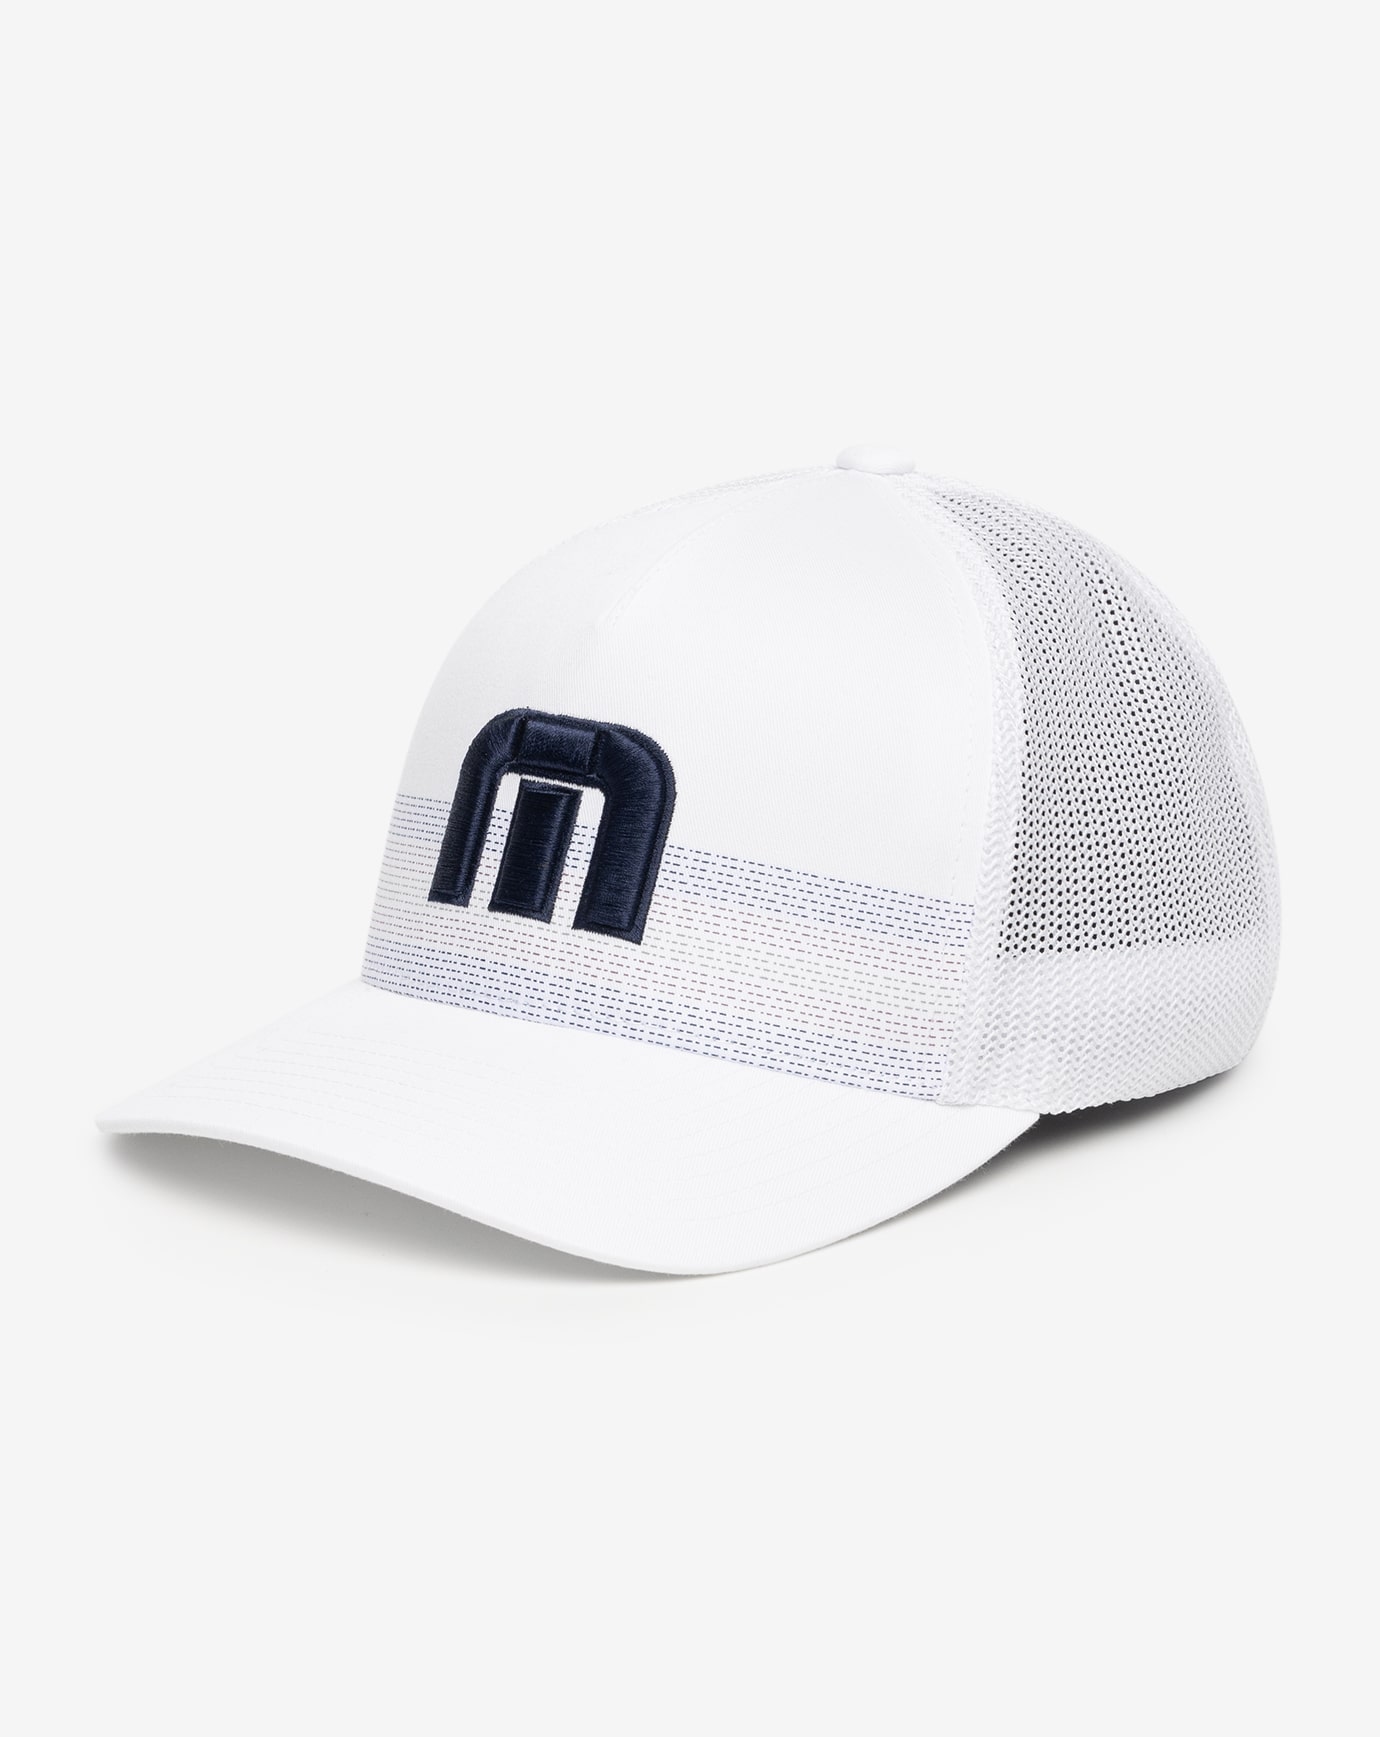 MEGAPHONE FITTED HAT Image Thumbnail 2